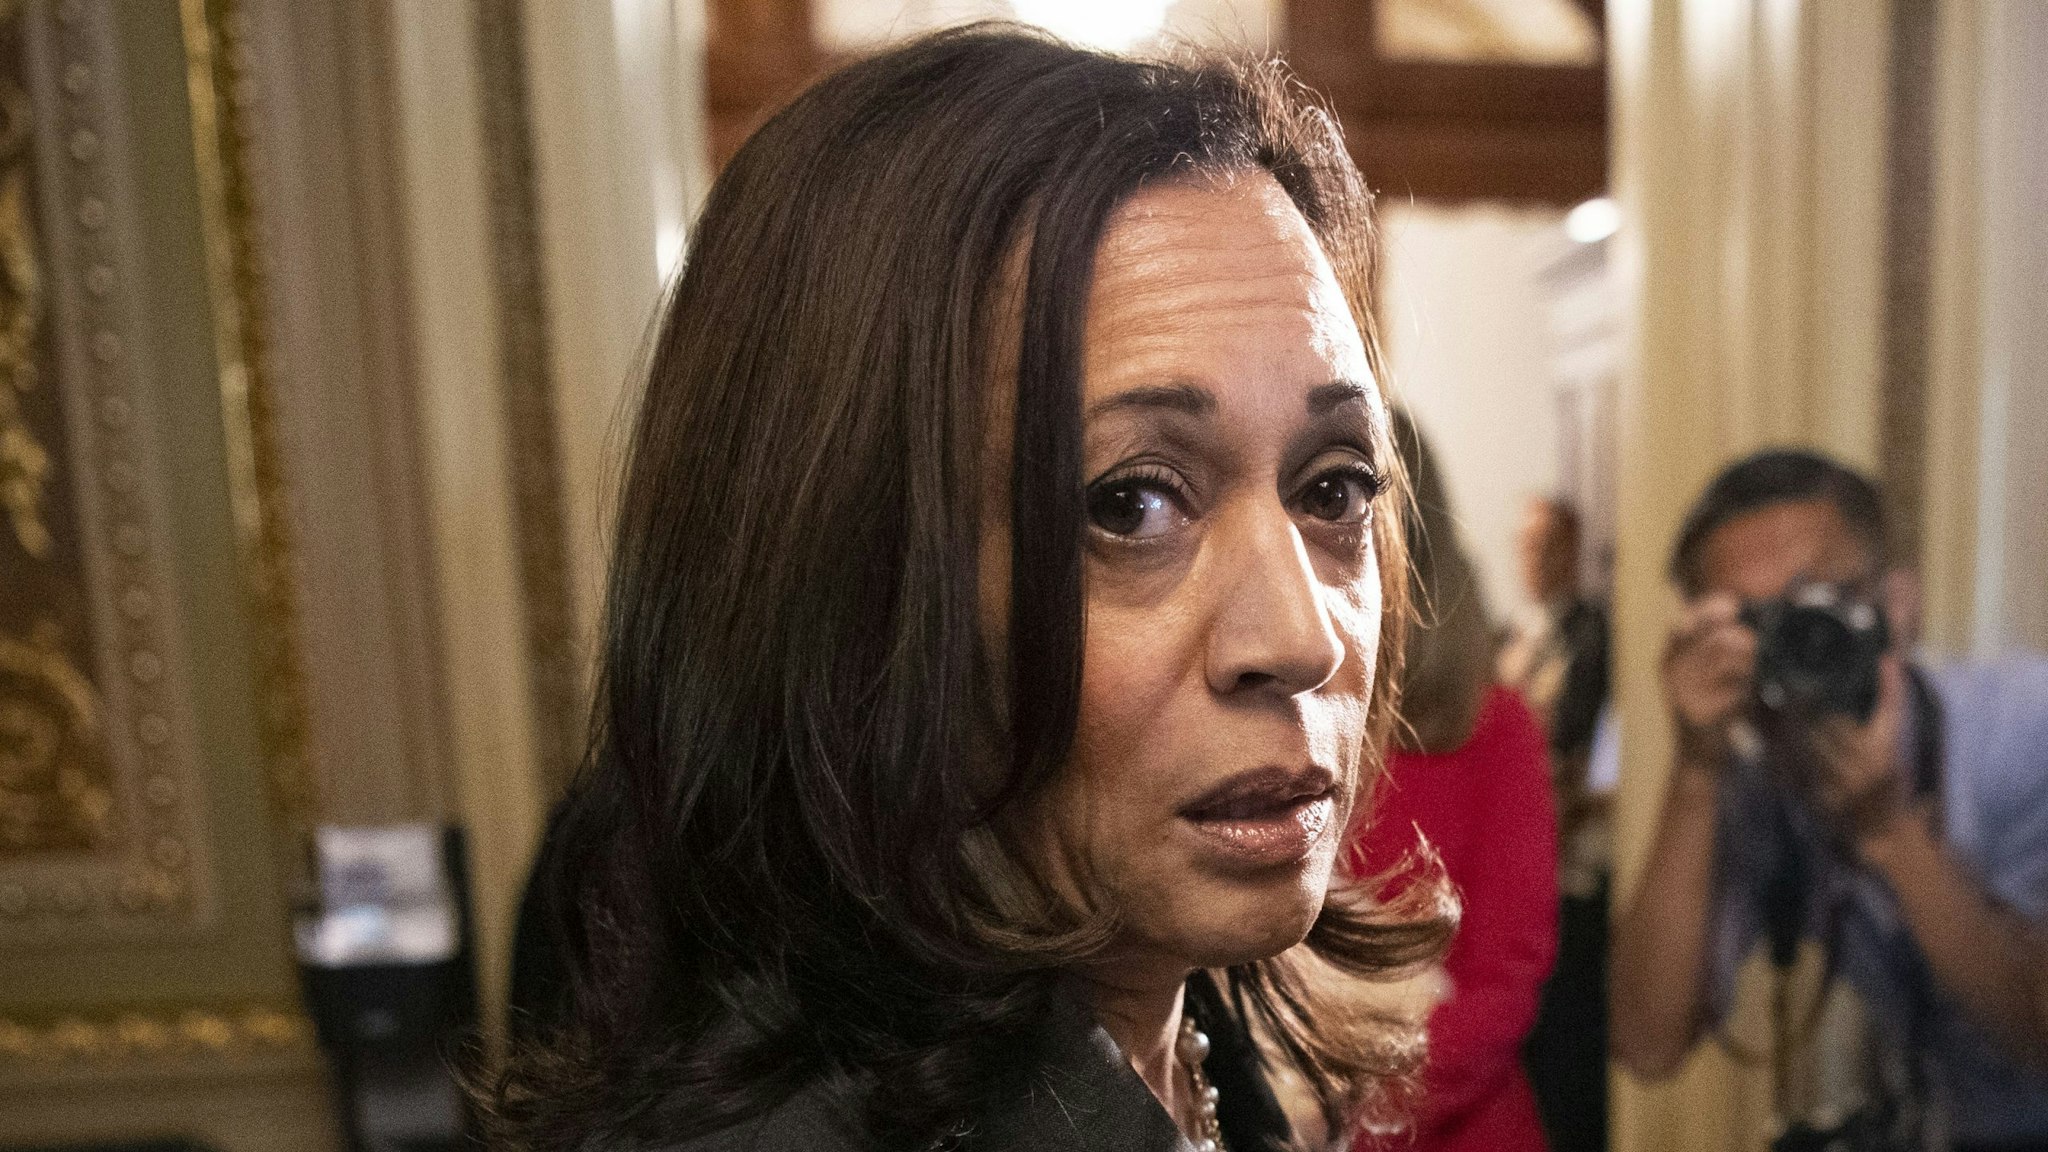 UNITED STATES - June 22: Vice President Kamala Harris talks with members of the media after Senate Republicans unanimously blocked advancing the For the People Act, a sweeping bill that would overhaul the election system and voting rights, in Washington on Tuesday, June 22, 2021.